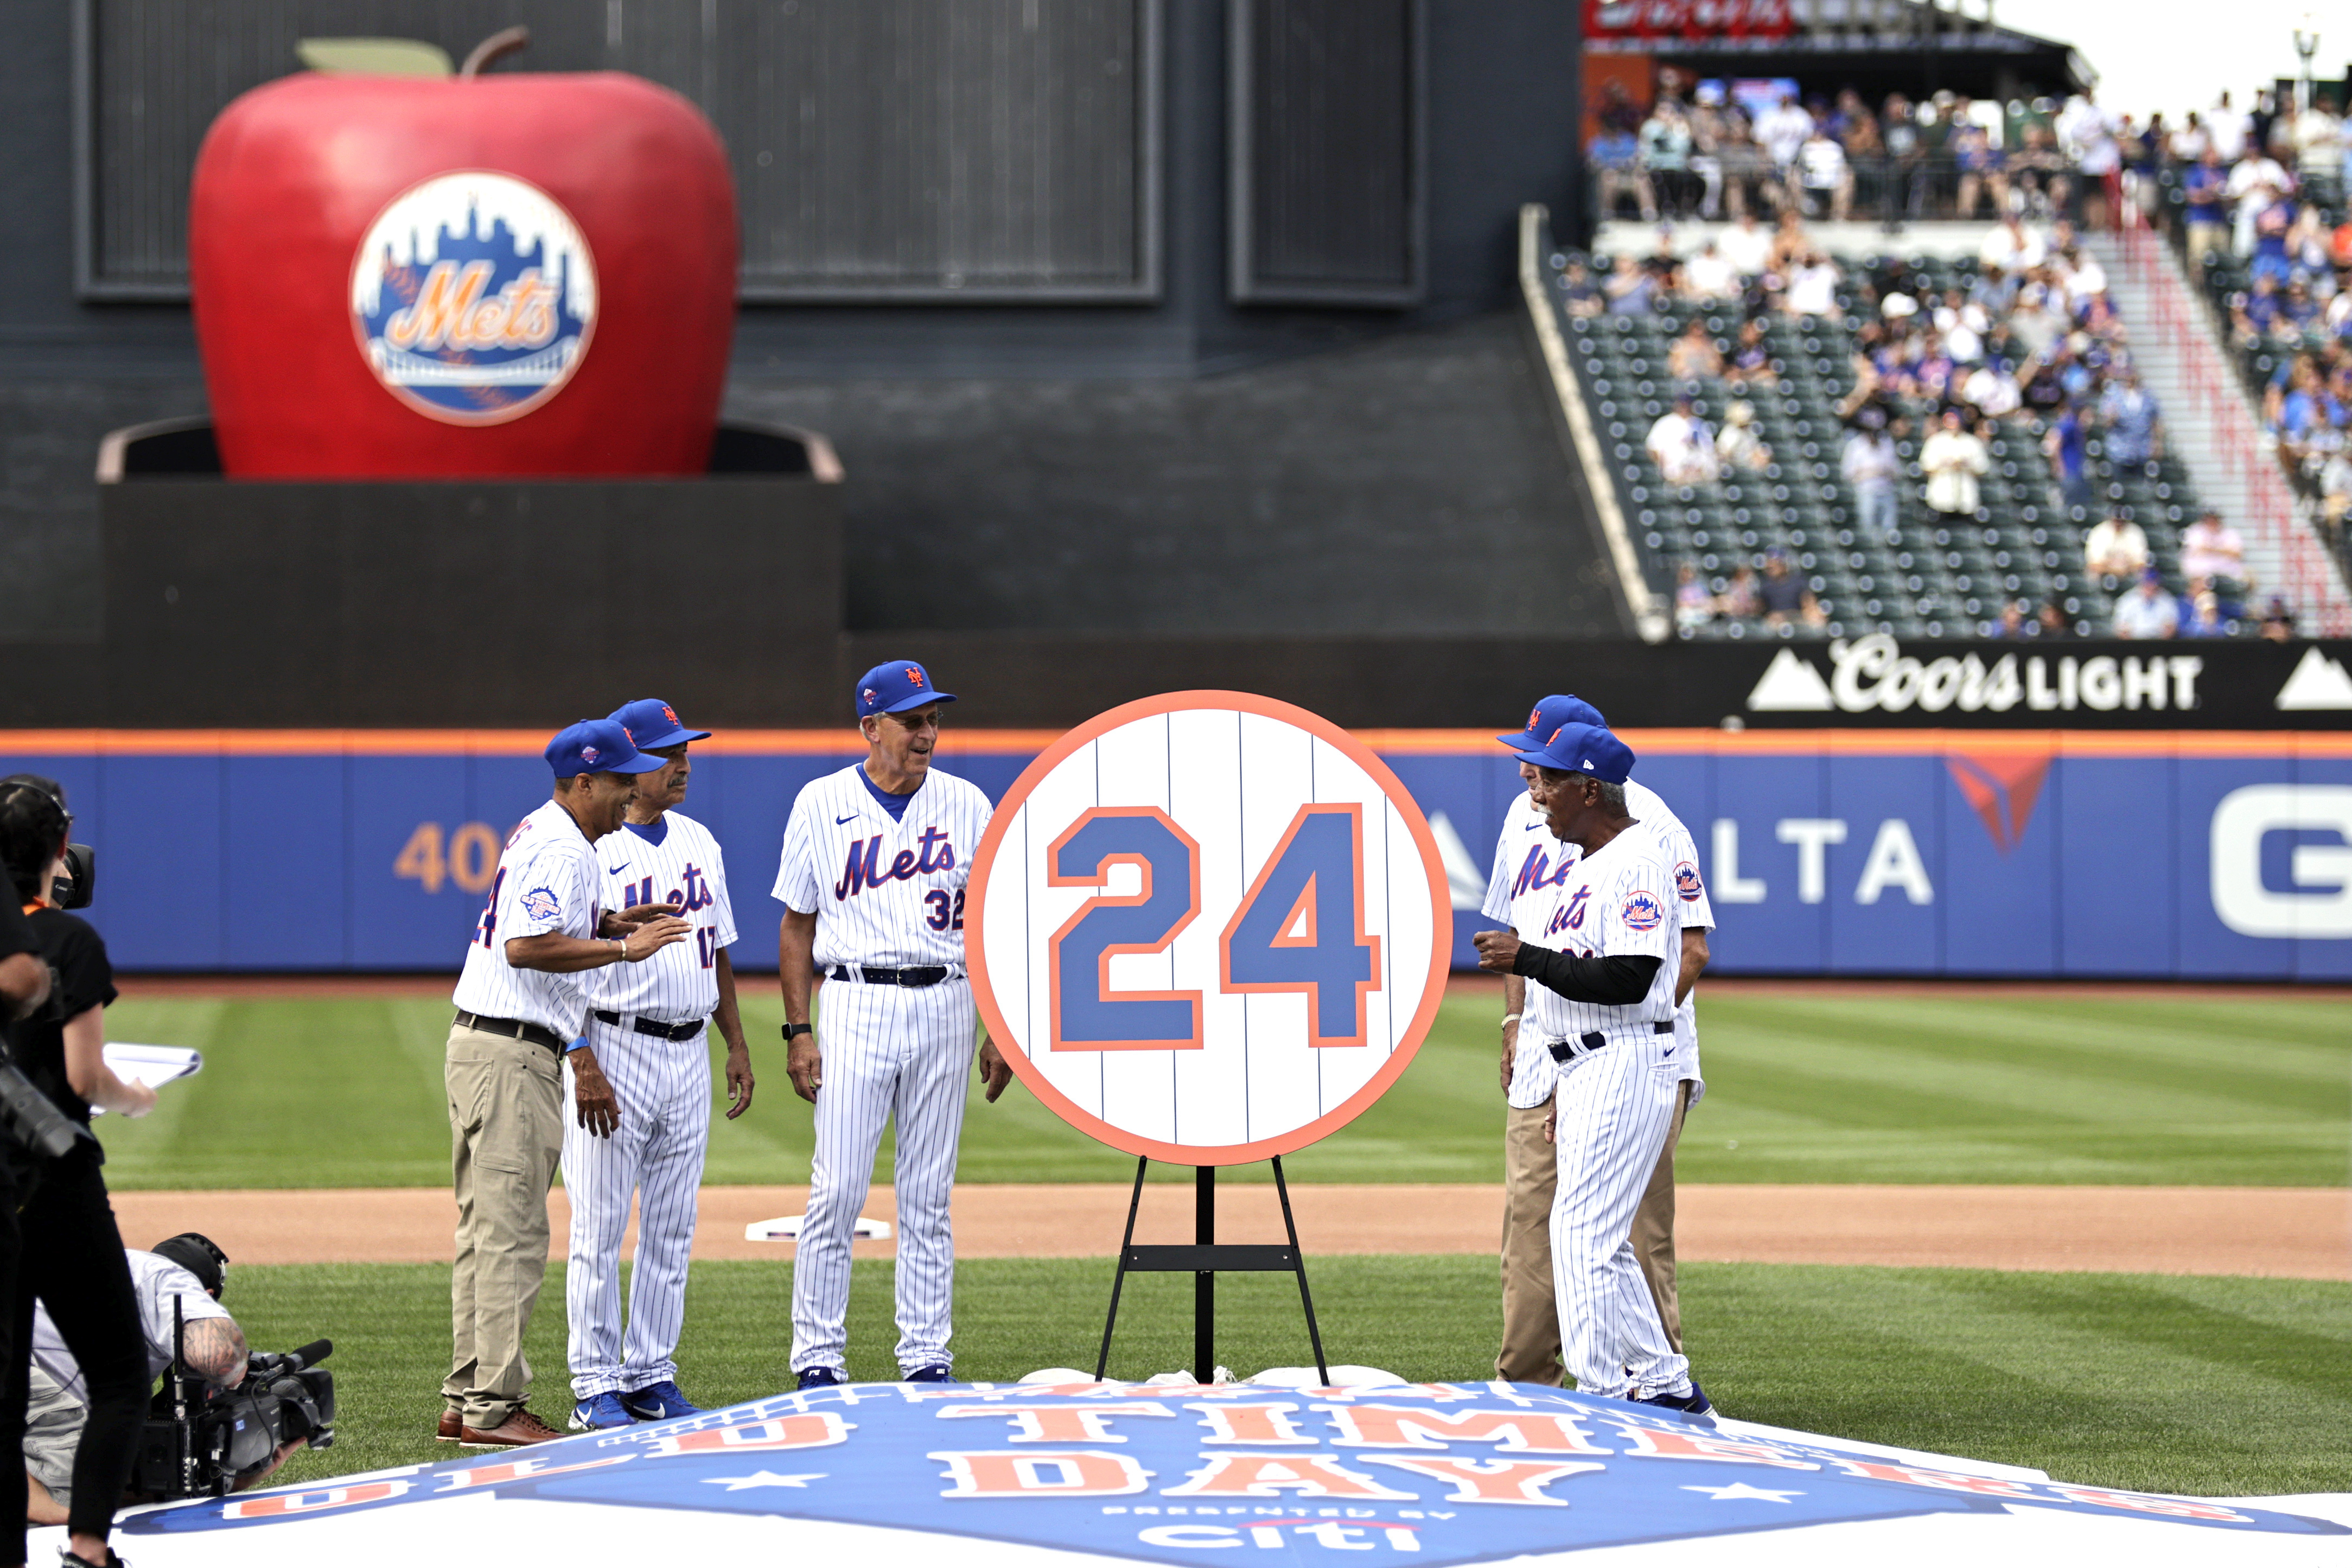 JAN. 25 MLB: New York Mets to retire Mike Piazza's uniform number